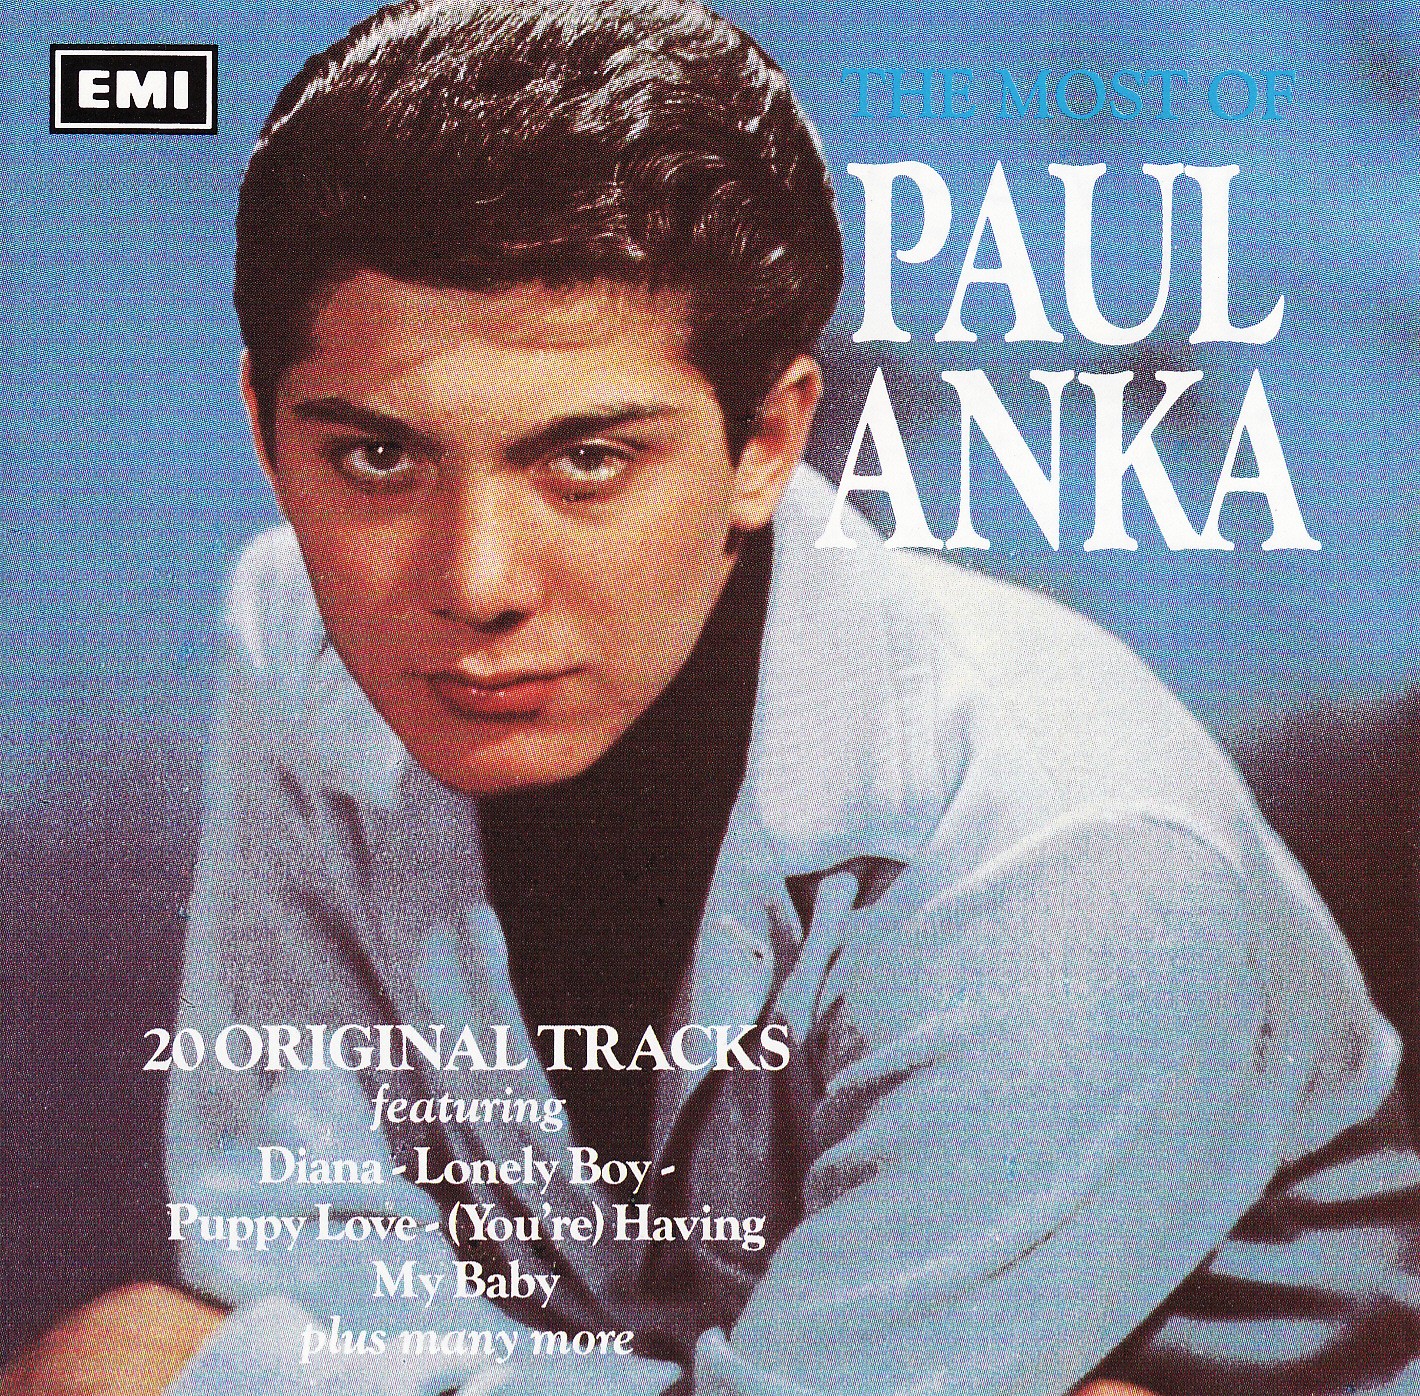 The Most of Paul Anka